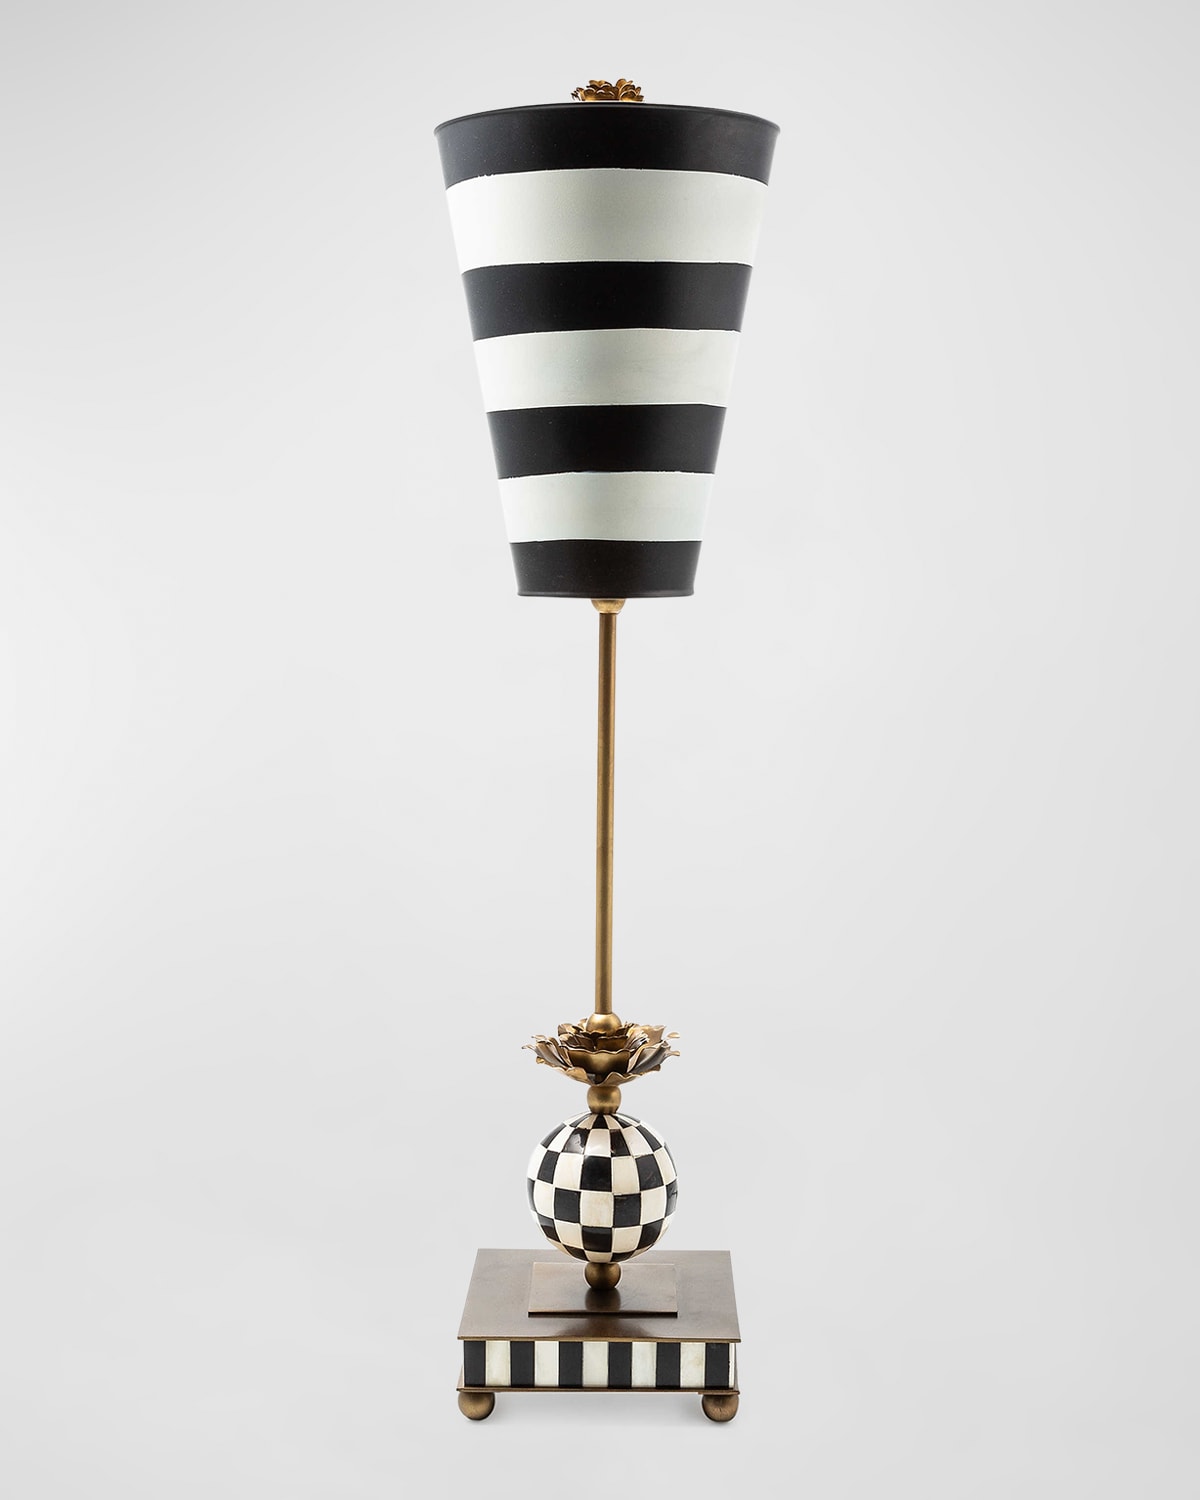 Mackenzie-childs Marquee Table Lamp